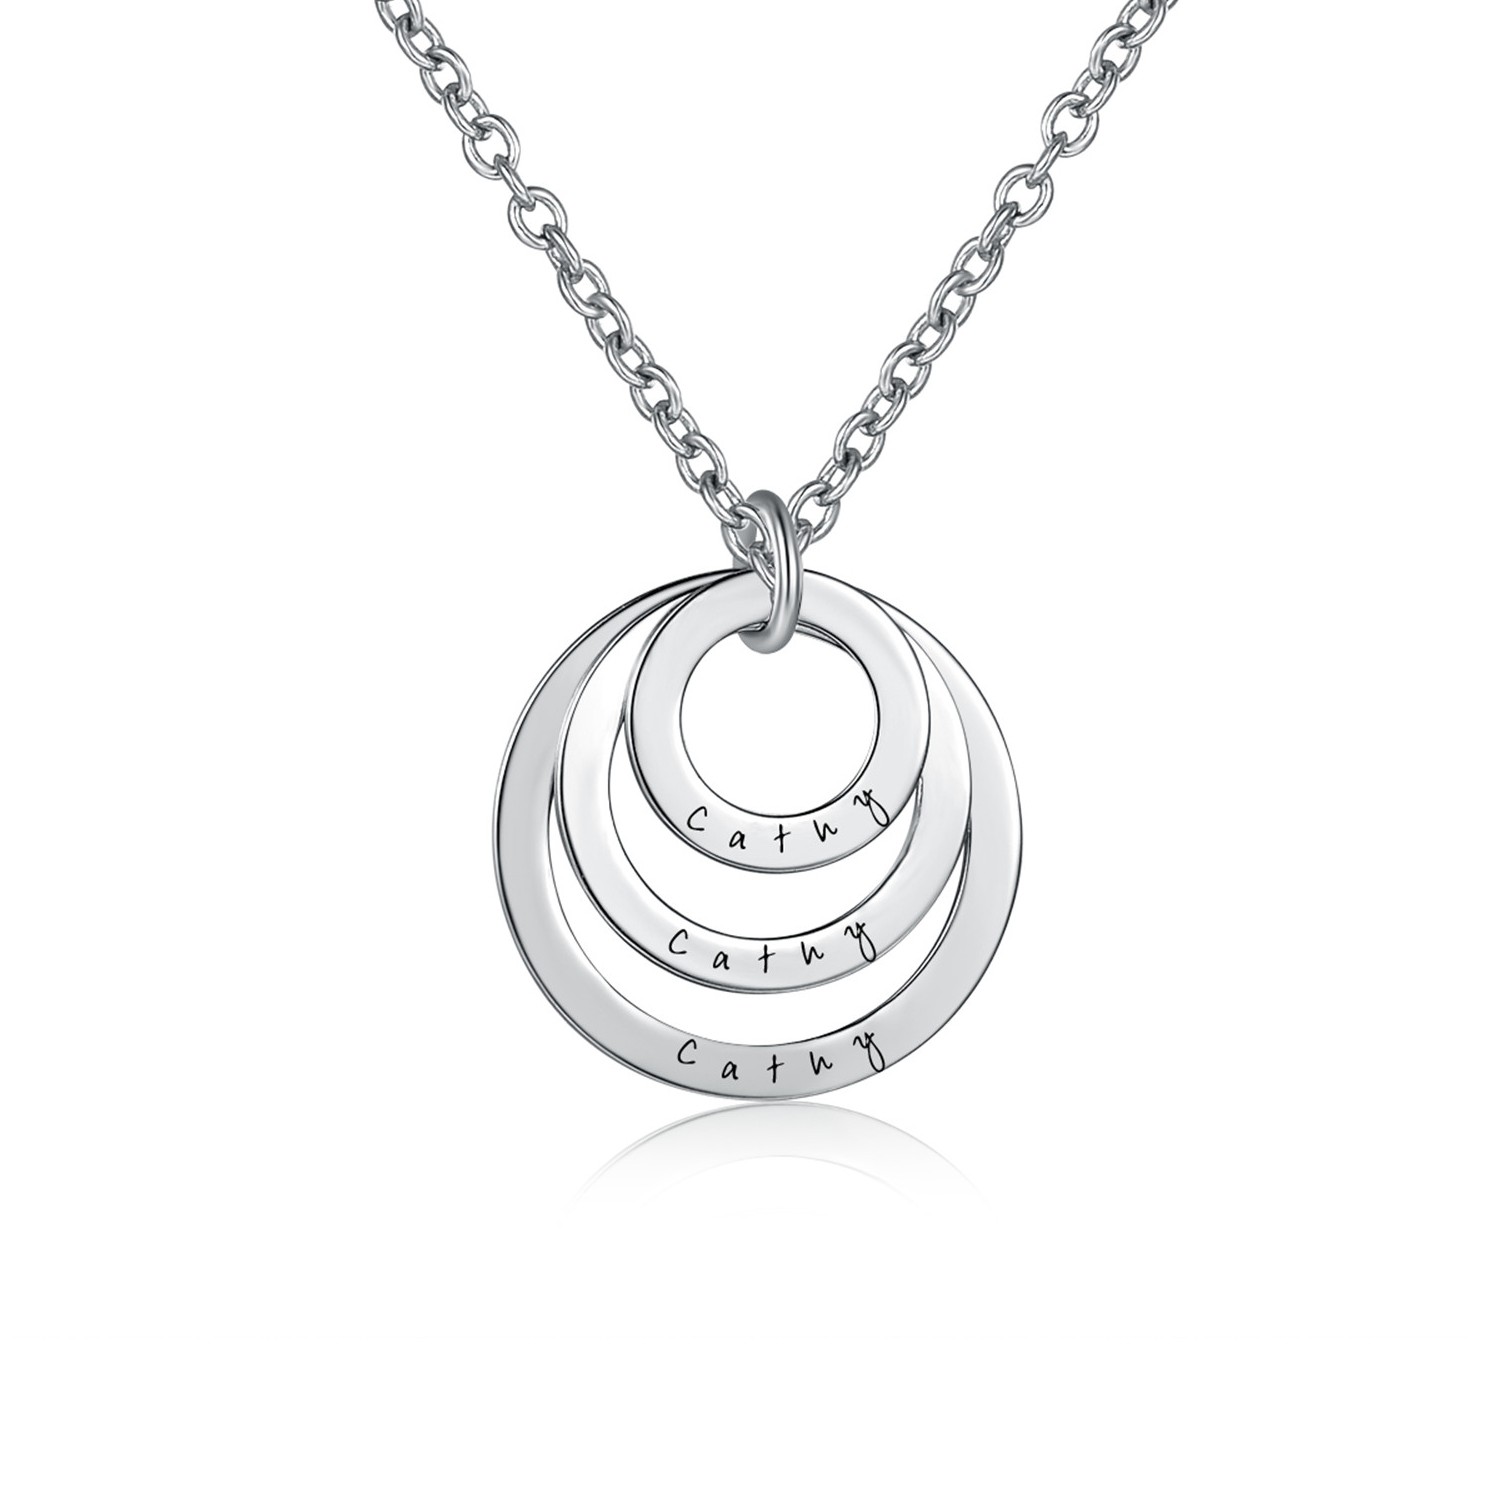 Engraved Wholesale Women Jewelry 925 Sterling Silver Triple Circle Custom Name Necklace